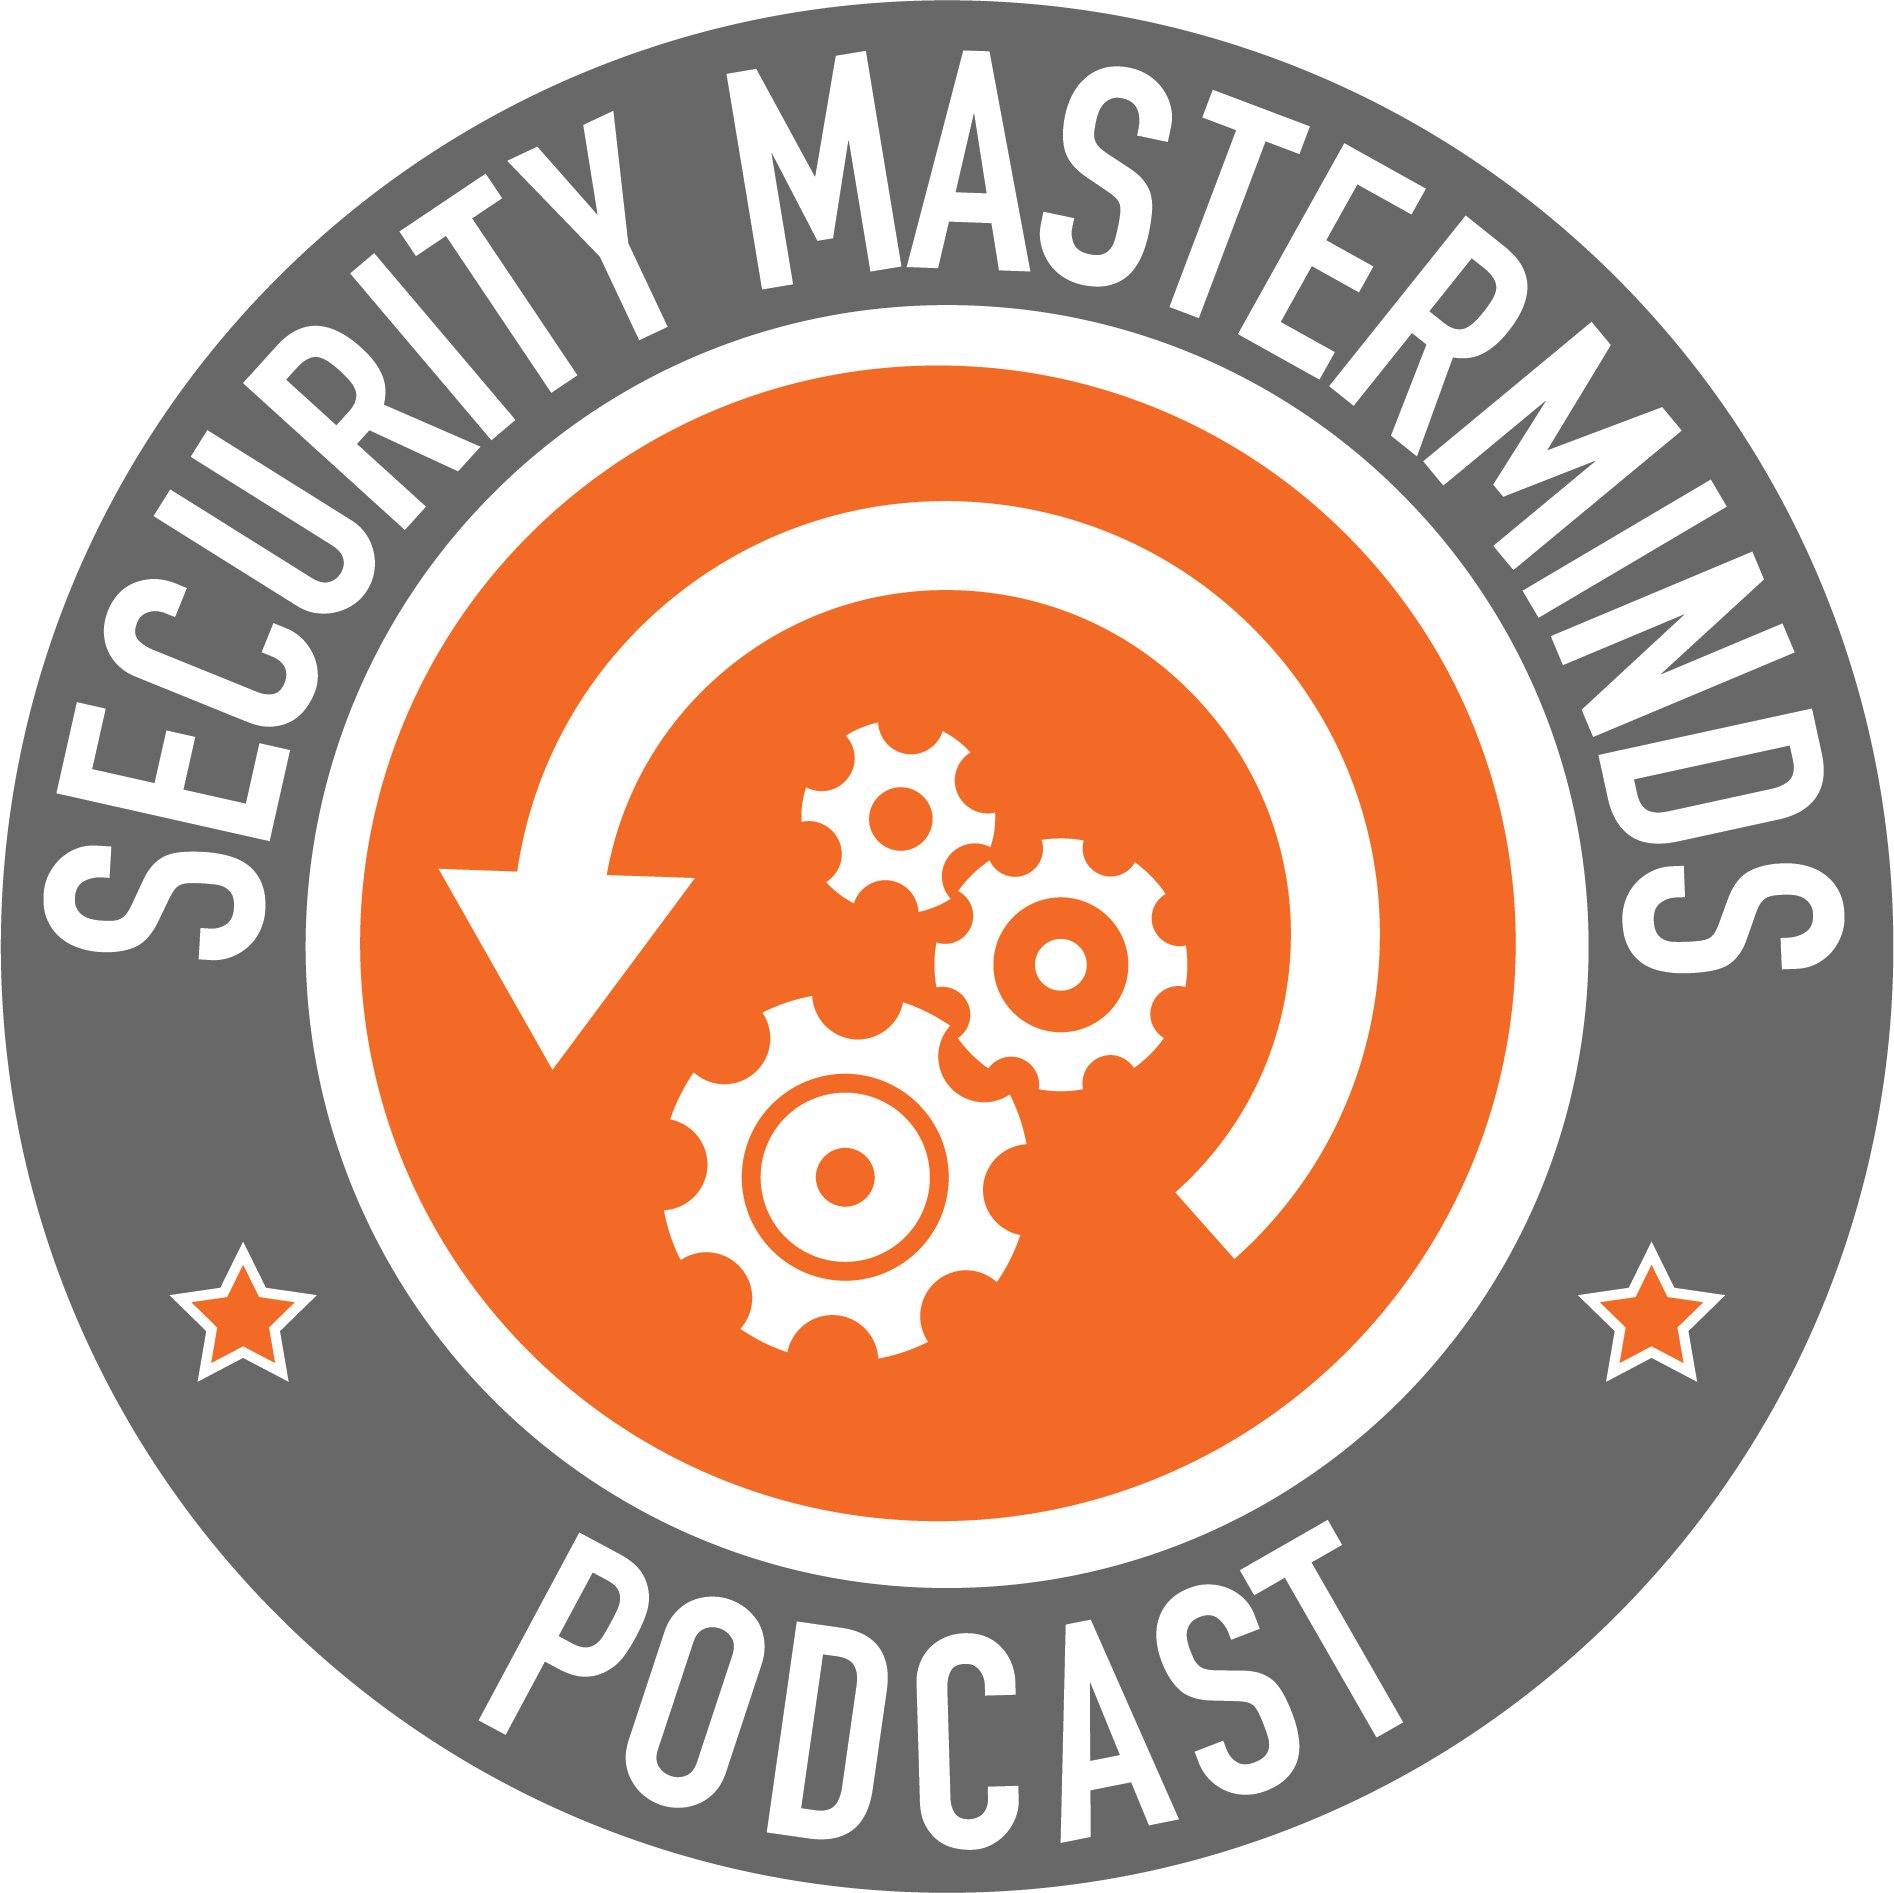 KnowBe4 Launches New “Security Masterminds” Podcast